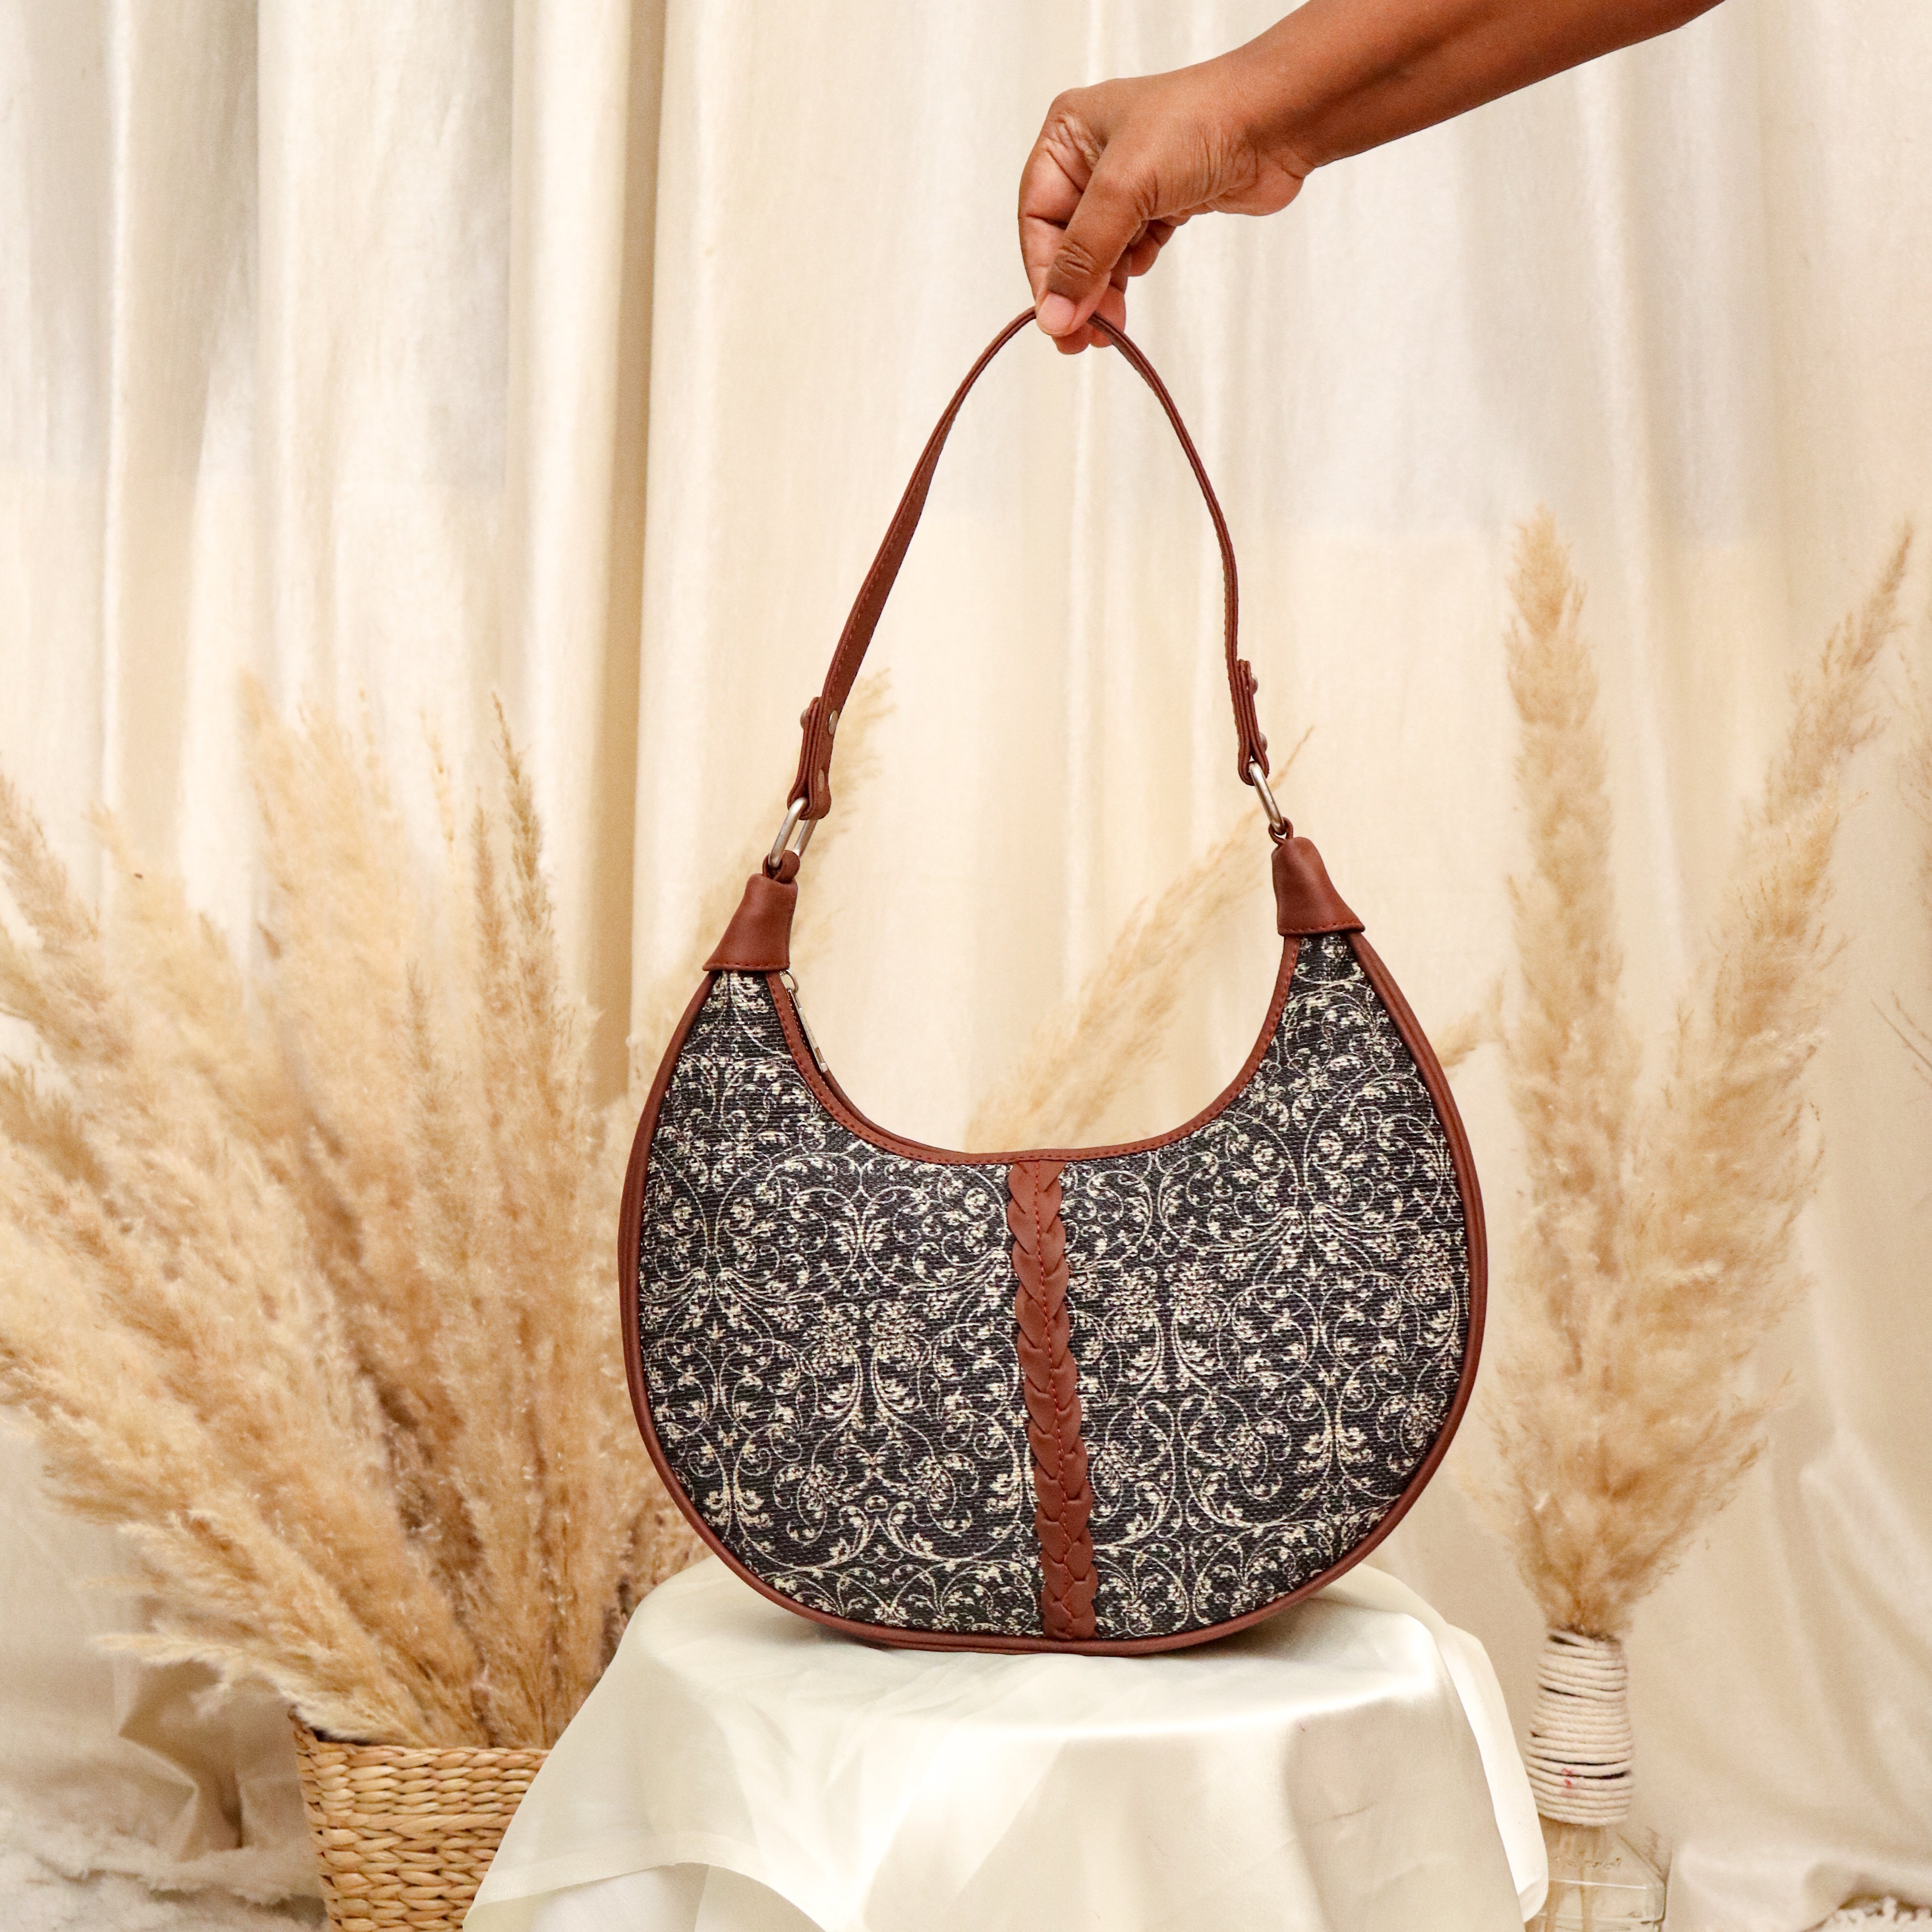 Vintage Women Woven Shoulder Bag Solid Color Lace Ribbon Tote Handbags  Wicker Boho Straw Bag for Summer Beach Handle Beige Bags